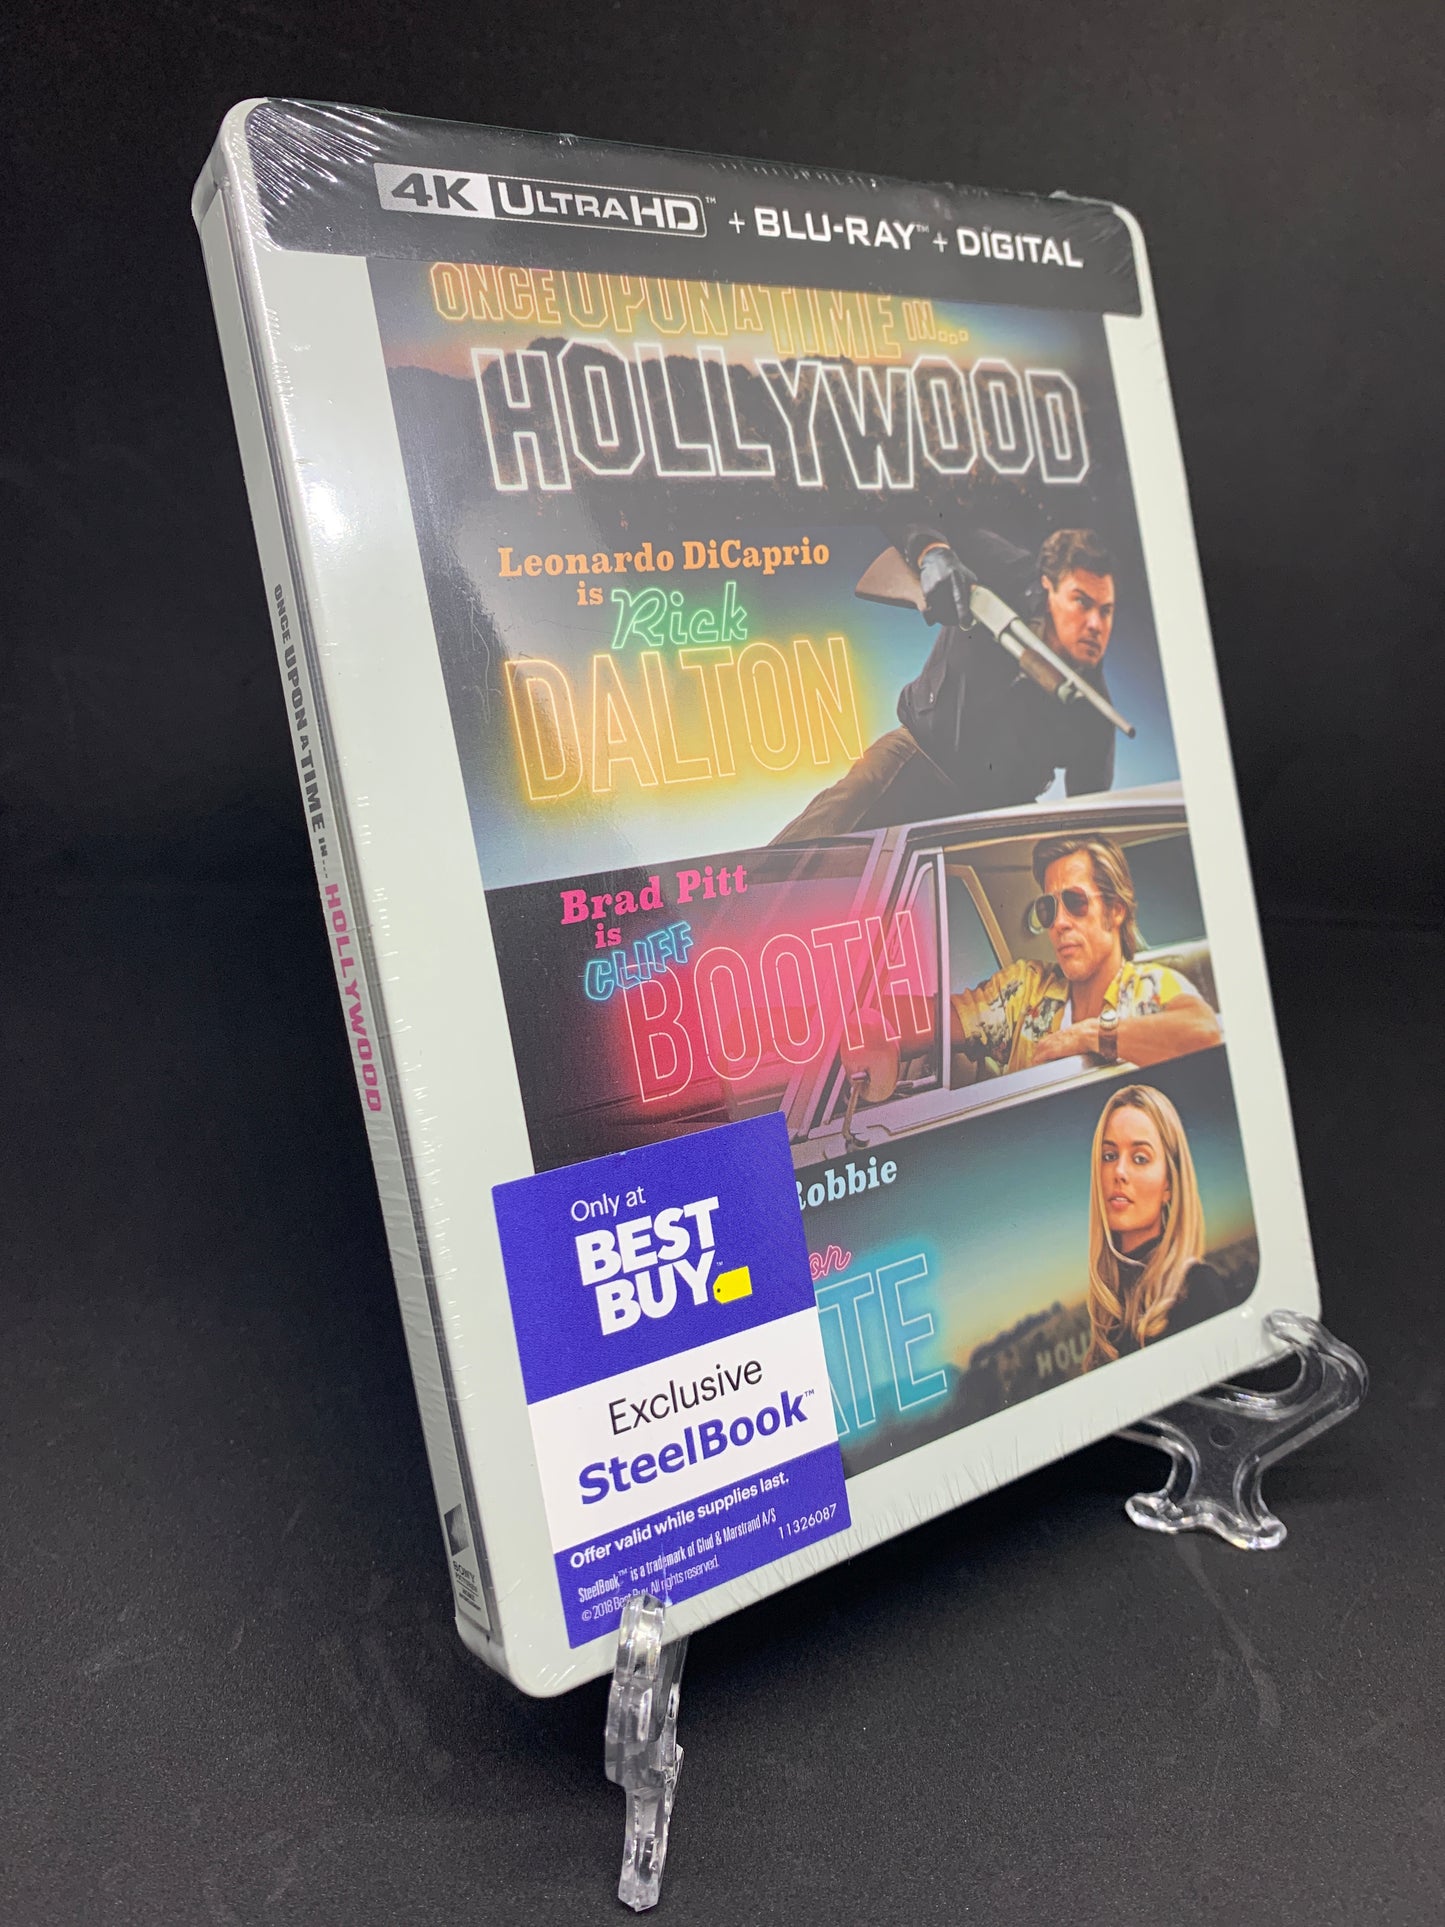 Once Upon a Time In Hollywood (4K UHD/Blu-Ray/Digital) Steelbook